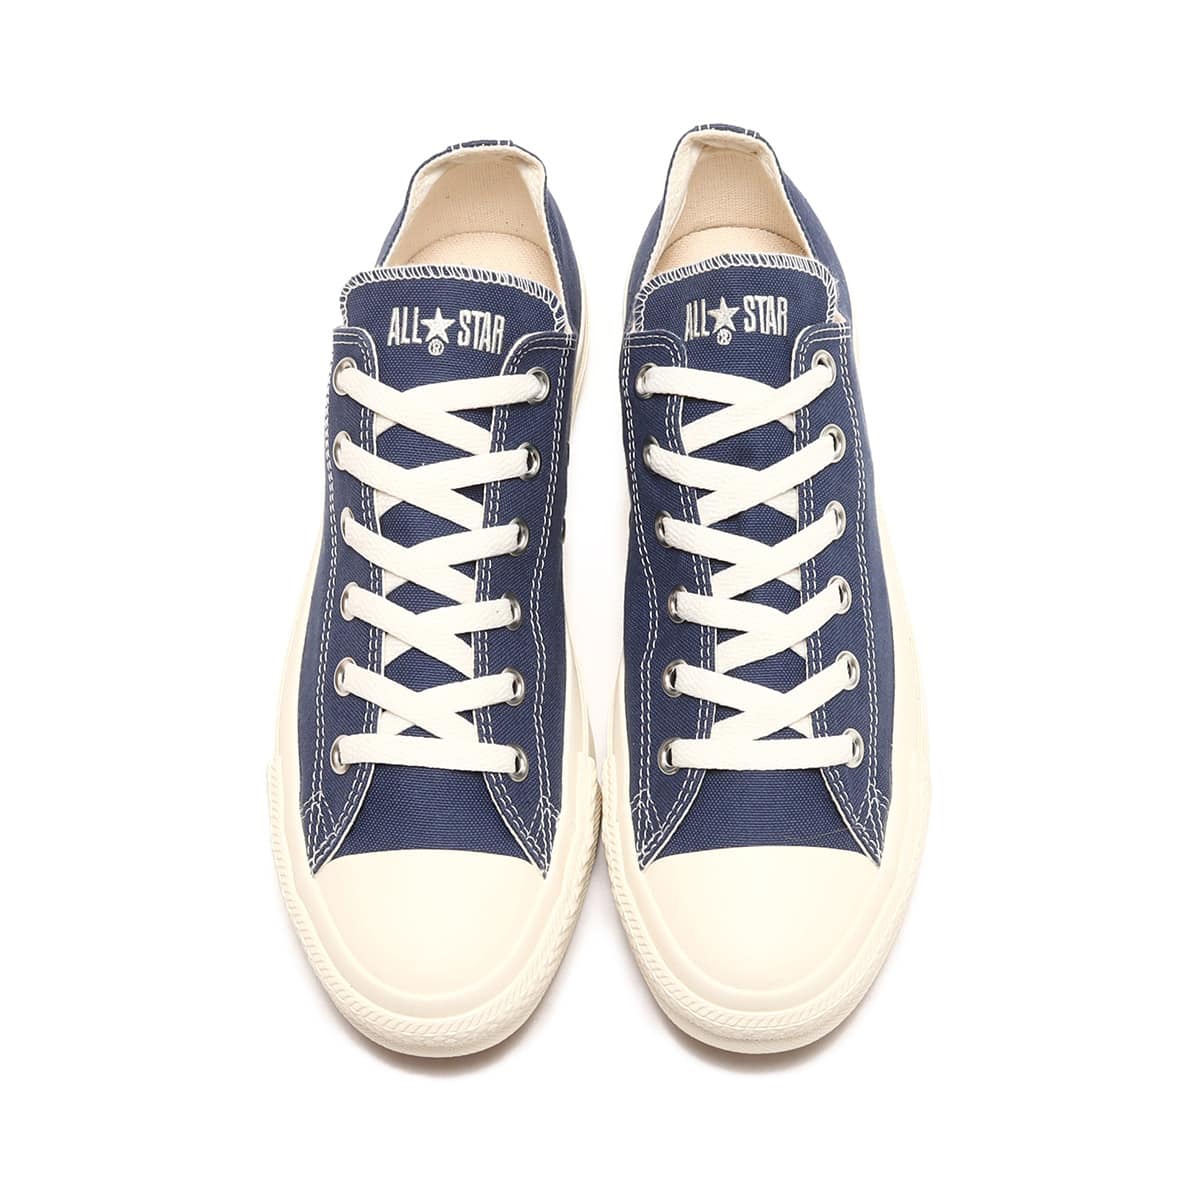 CONVERSE ALL STAR NV-ARMY'S OX NAVY 23SS-I